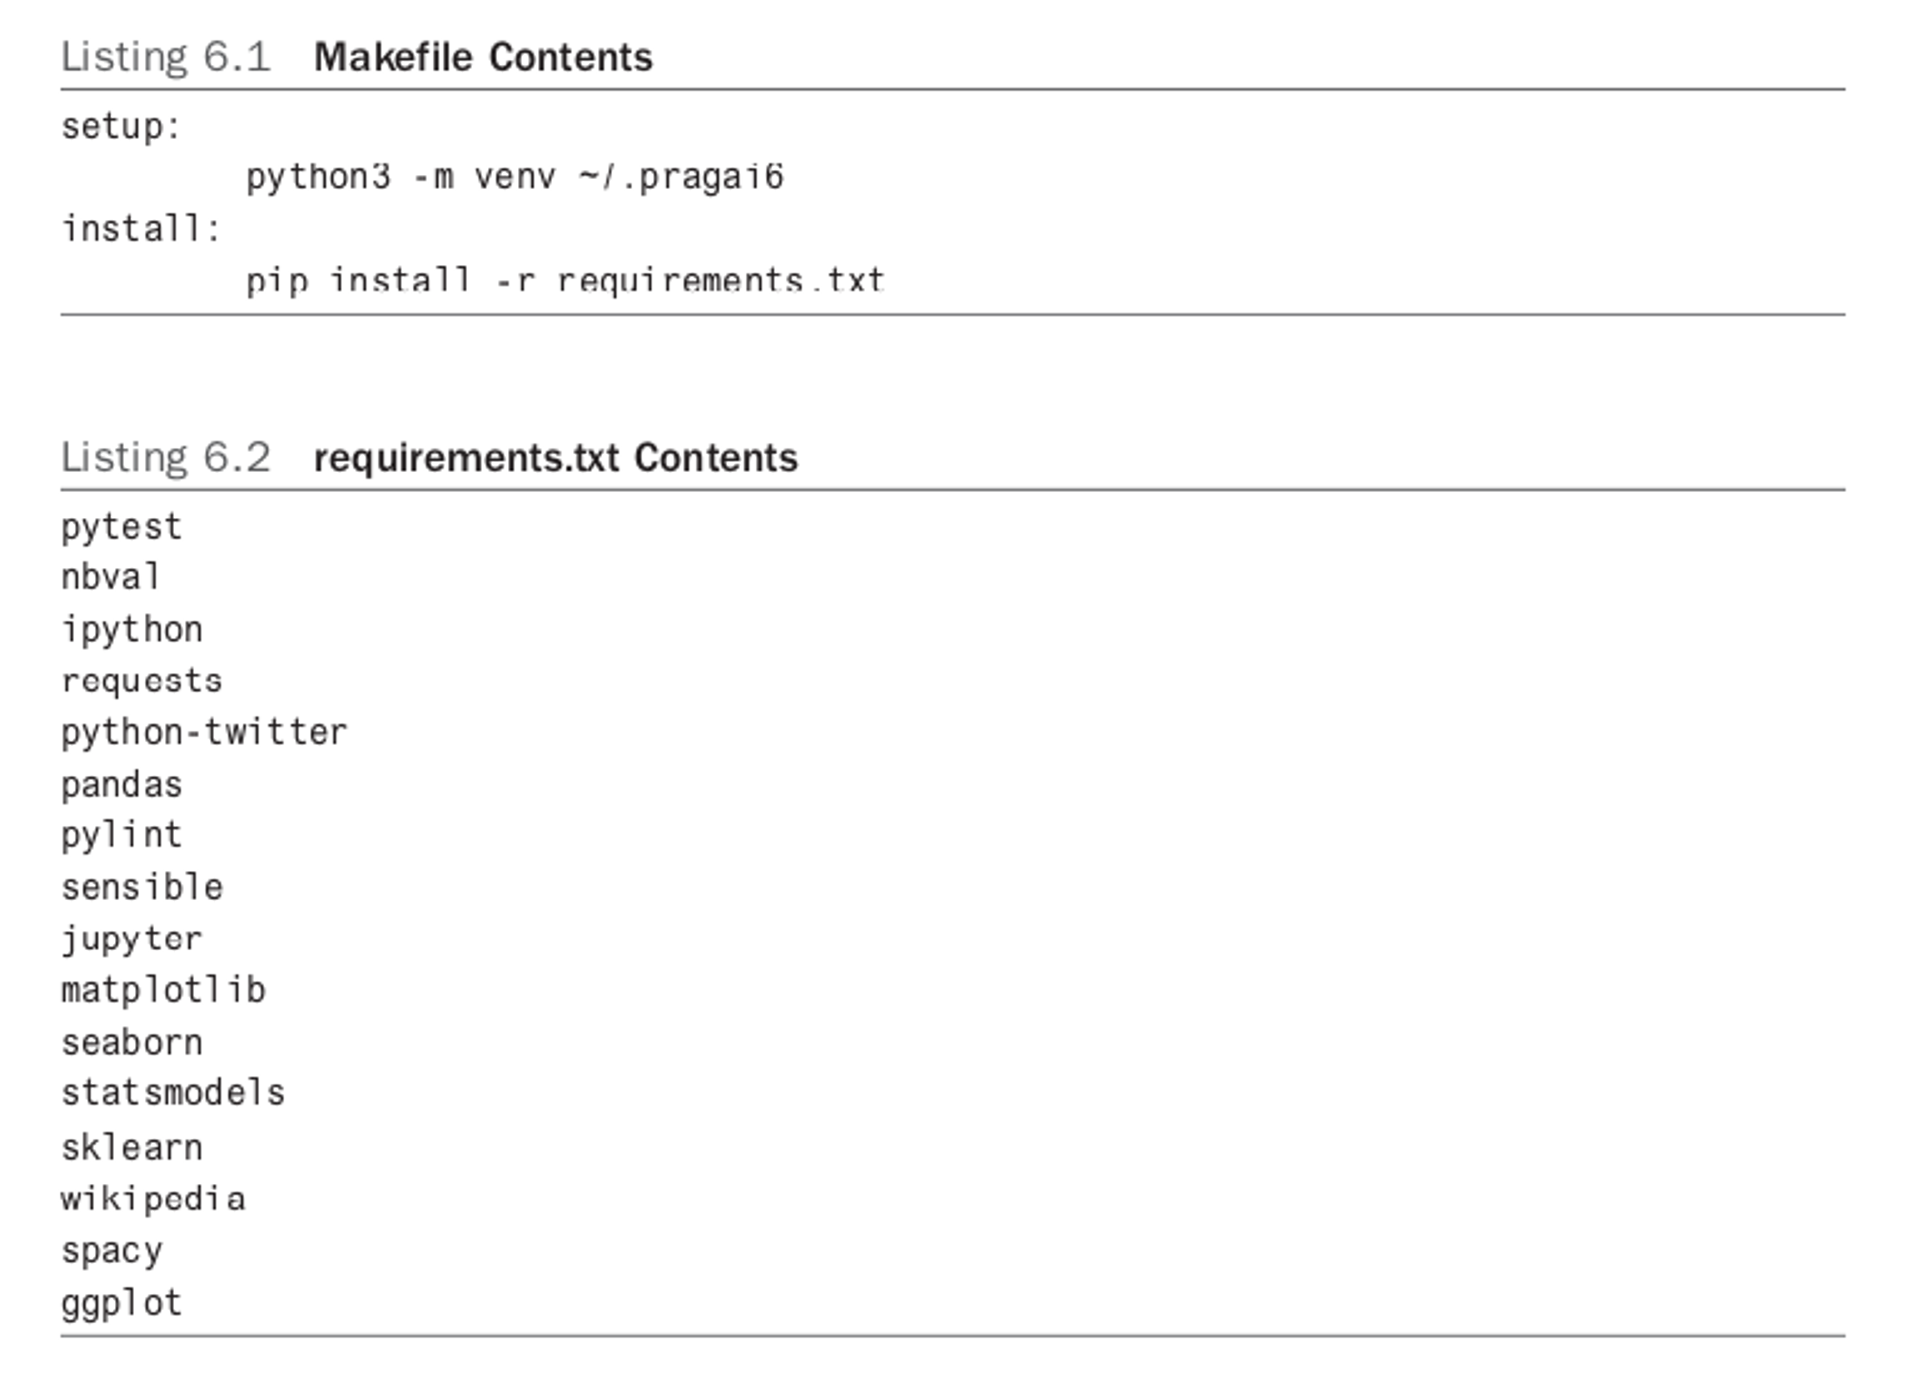 Makefile Contents and requirements.txt contents